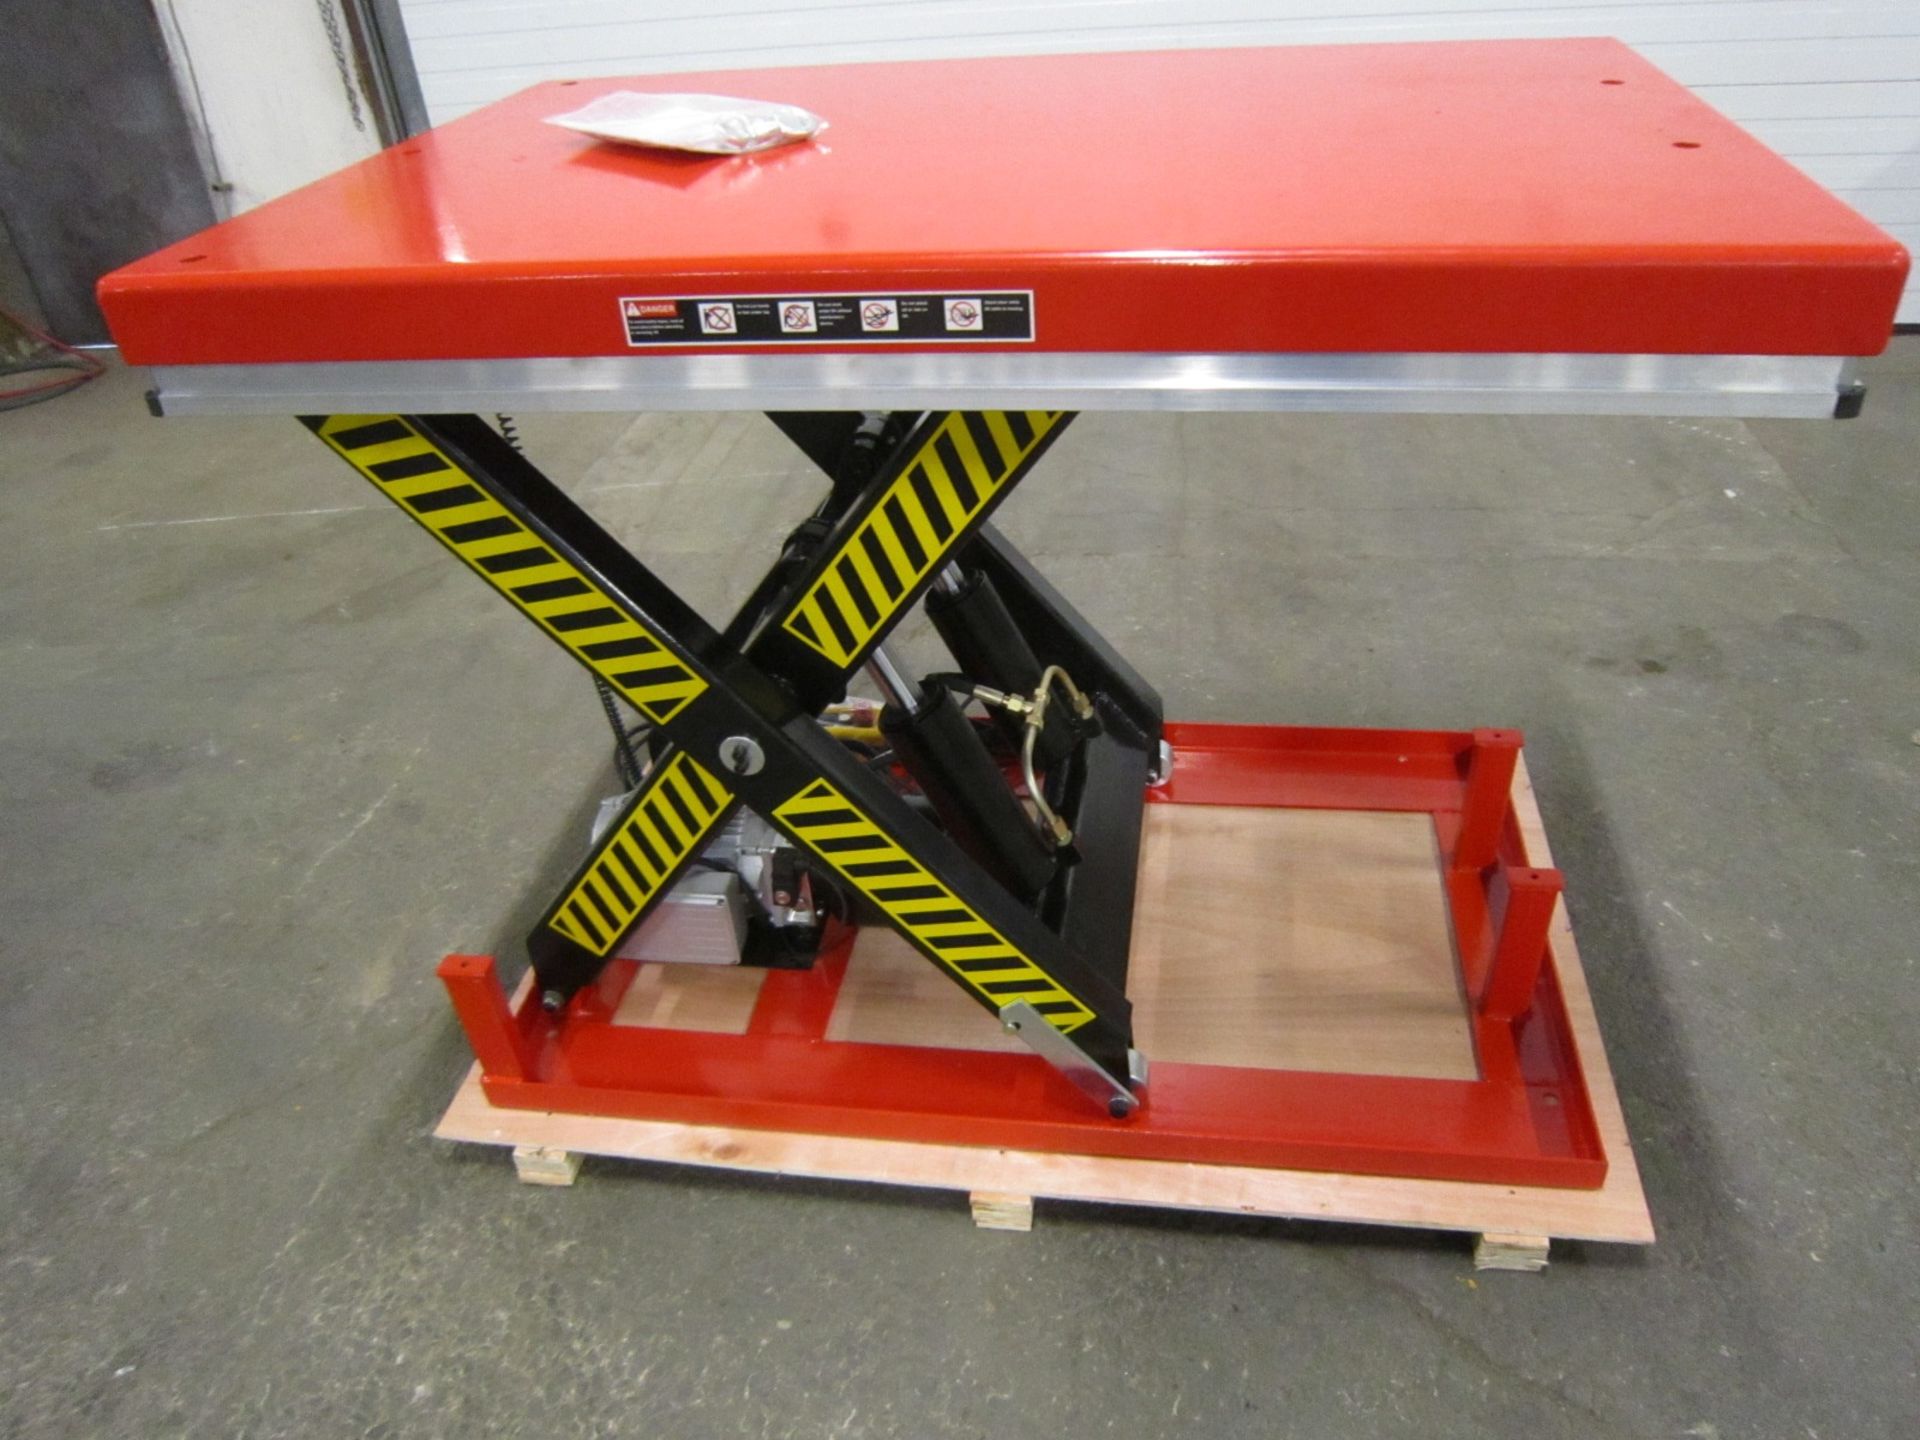 Olympic Hydraulic Lift Table 32" x 52" x 40" lift - 4000lbs capacity - UNUSED and MINT - 115V